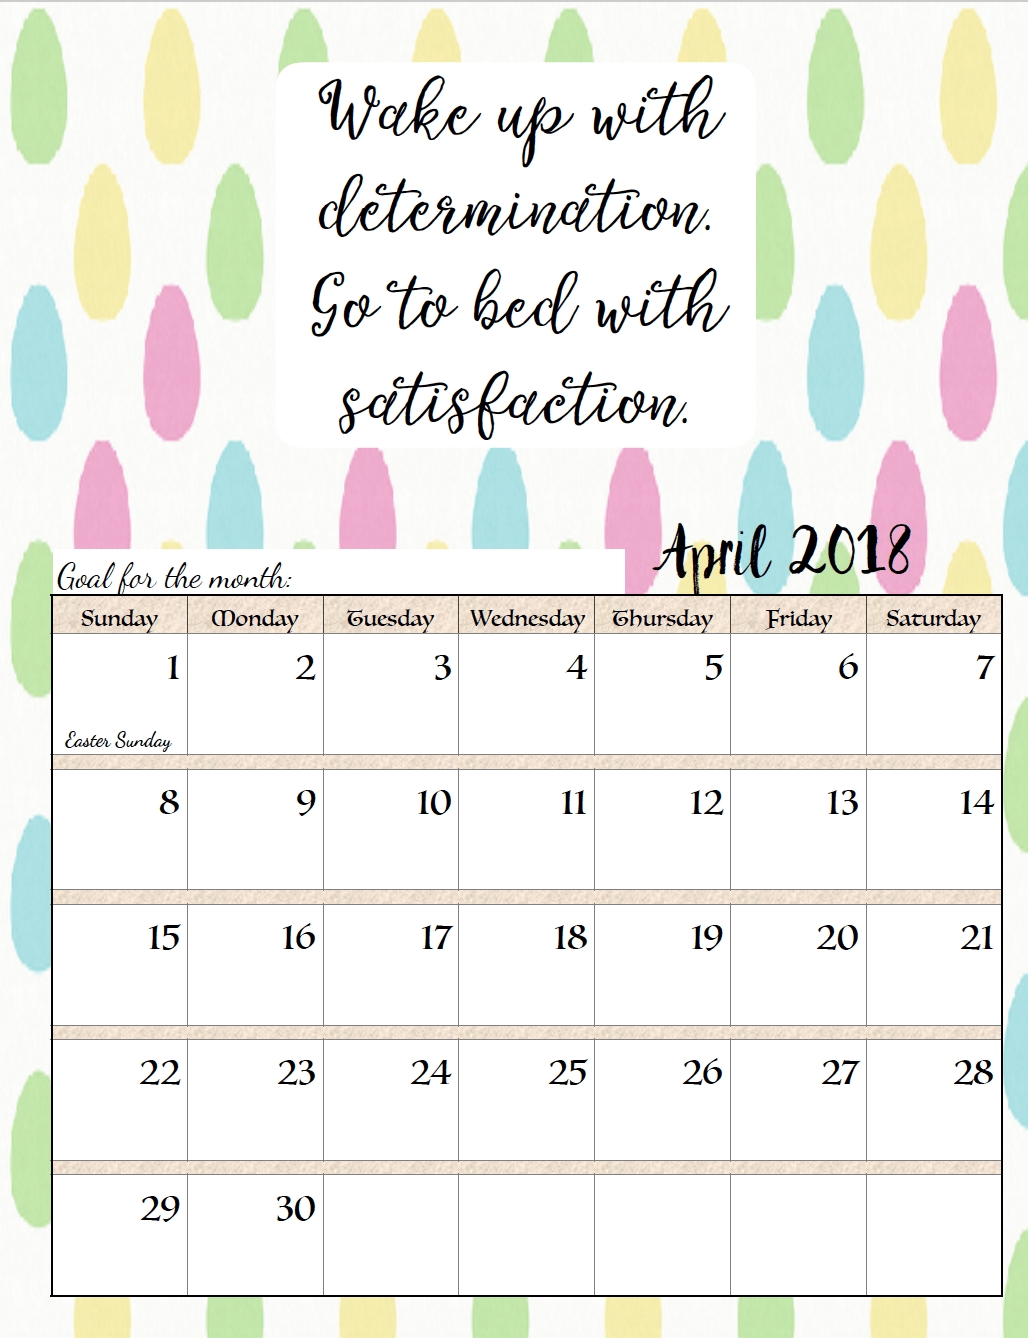 April 2018 Calendar With Motivation Quotes | 2018 Calendars within Monthly Calendar - Vacation Themed